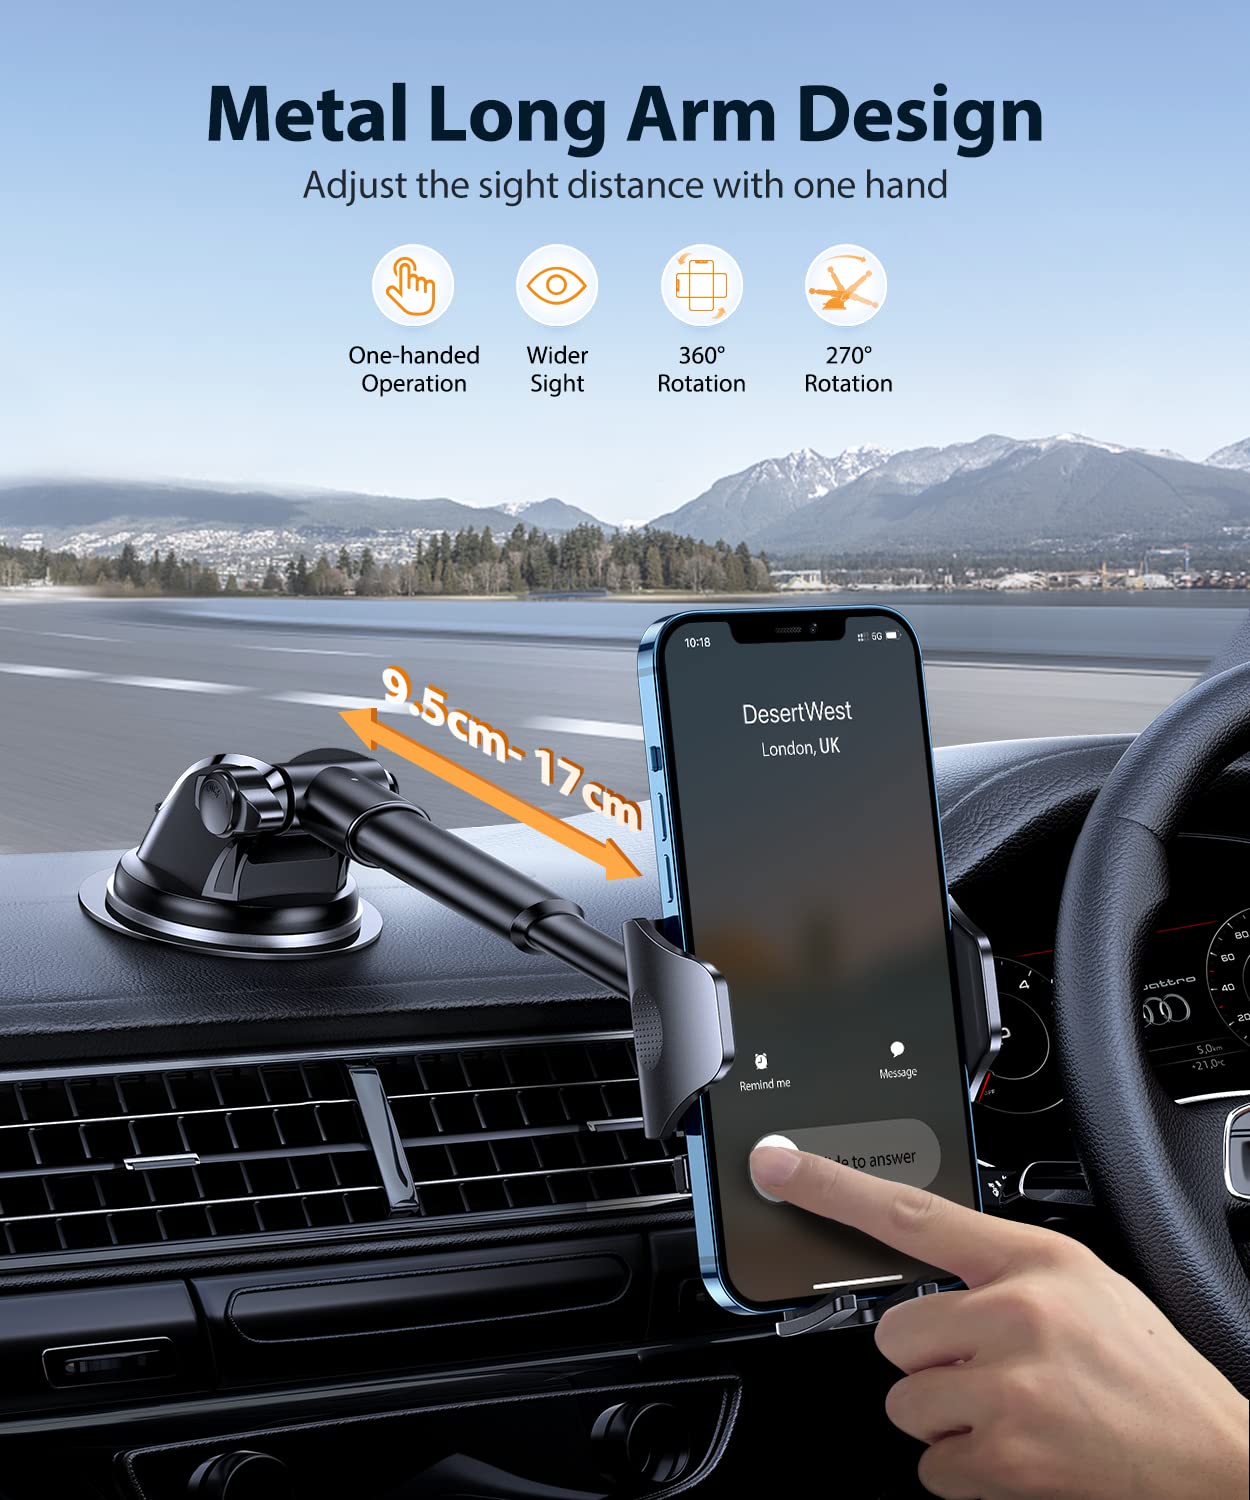 [2022 Sturdiest] DesertWest Car Phone Holder Mount [Unbreakable & Never Fall Off] Phone Holder for Cars Universal Mobile Phone Cradle for iPhone 11 12 13 Pro Max Samsung Air Vent Dashboard Windscreen